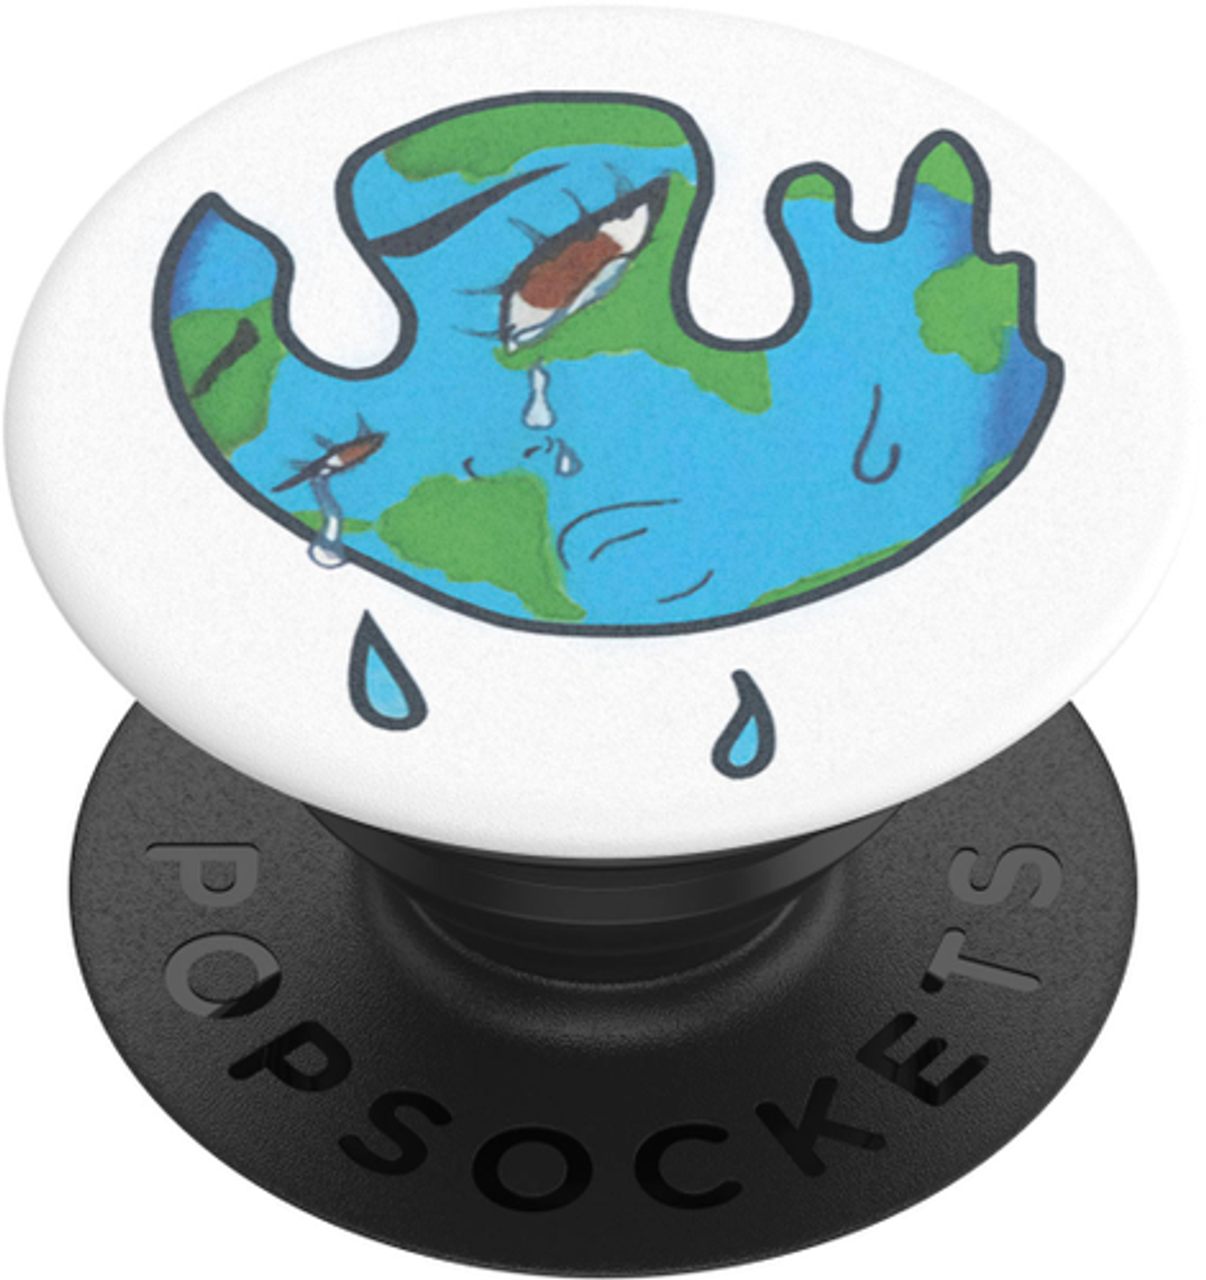 PopSockets - PlantCore Cell Phone Grip & Stand - One Earth, One Chance